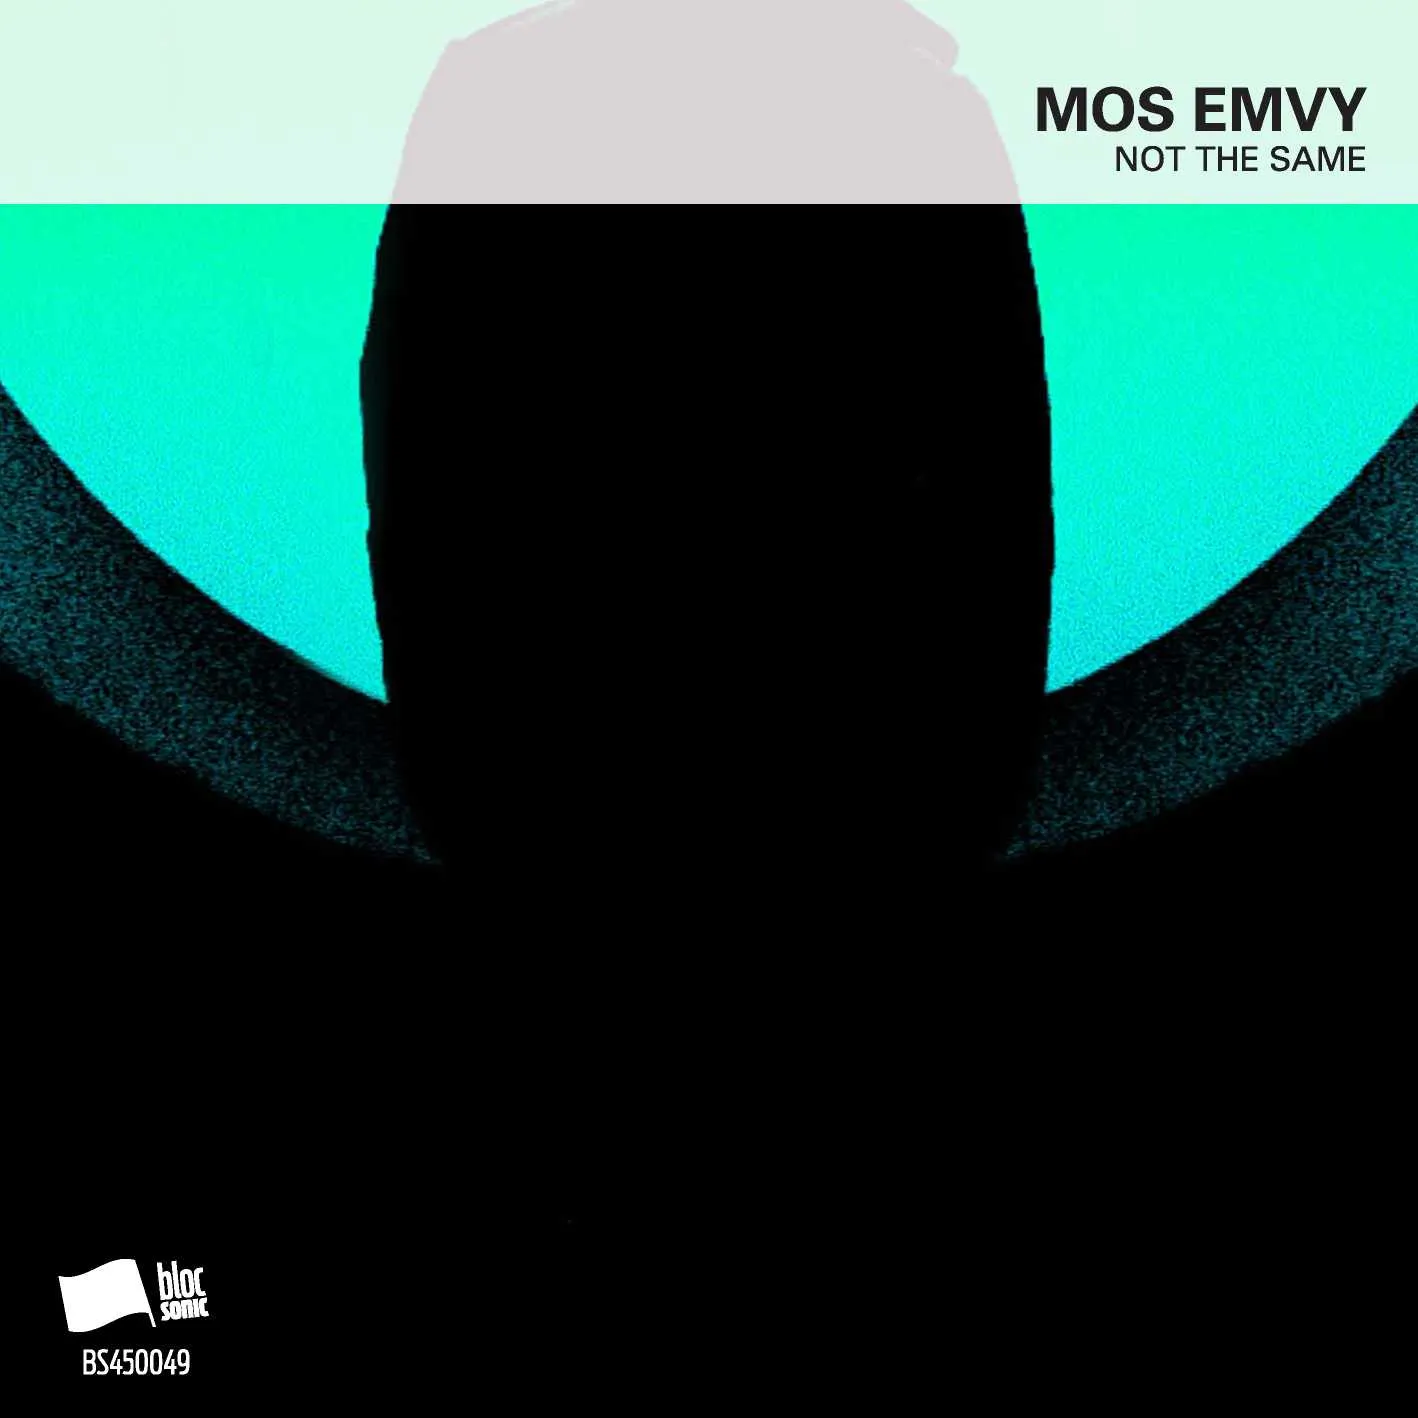 Album cover for “Not The Same” by Mos Emvy